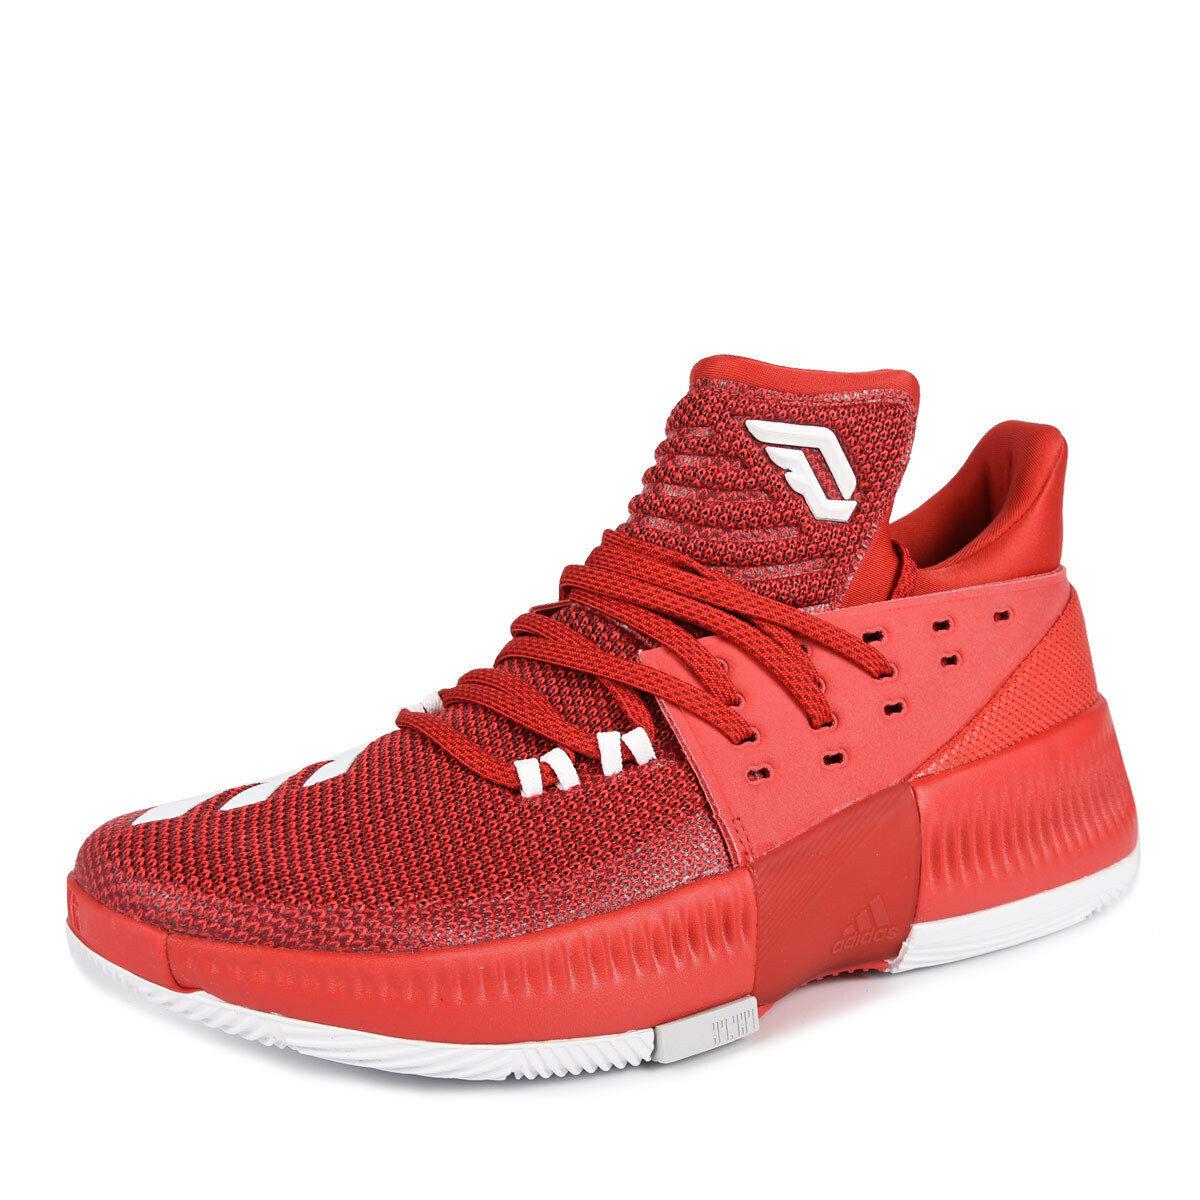 Adidas Dame 3 D Lillard 3 Basketball Shoes Athletic Sneakers Power Red